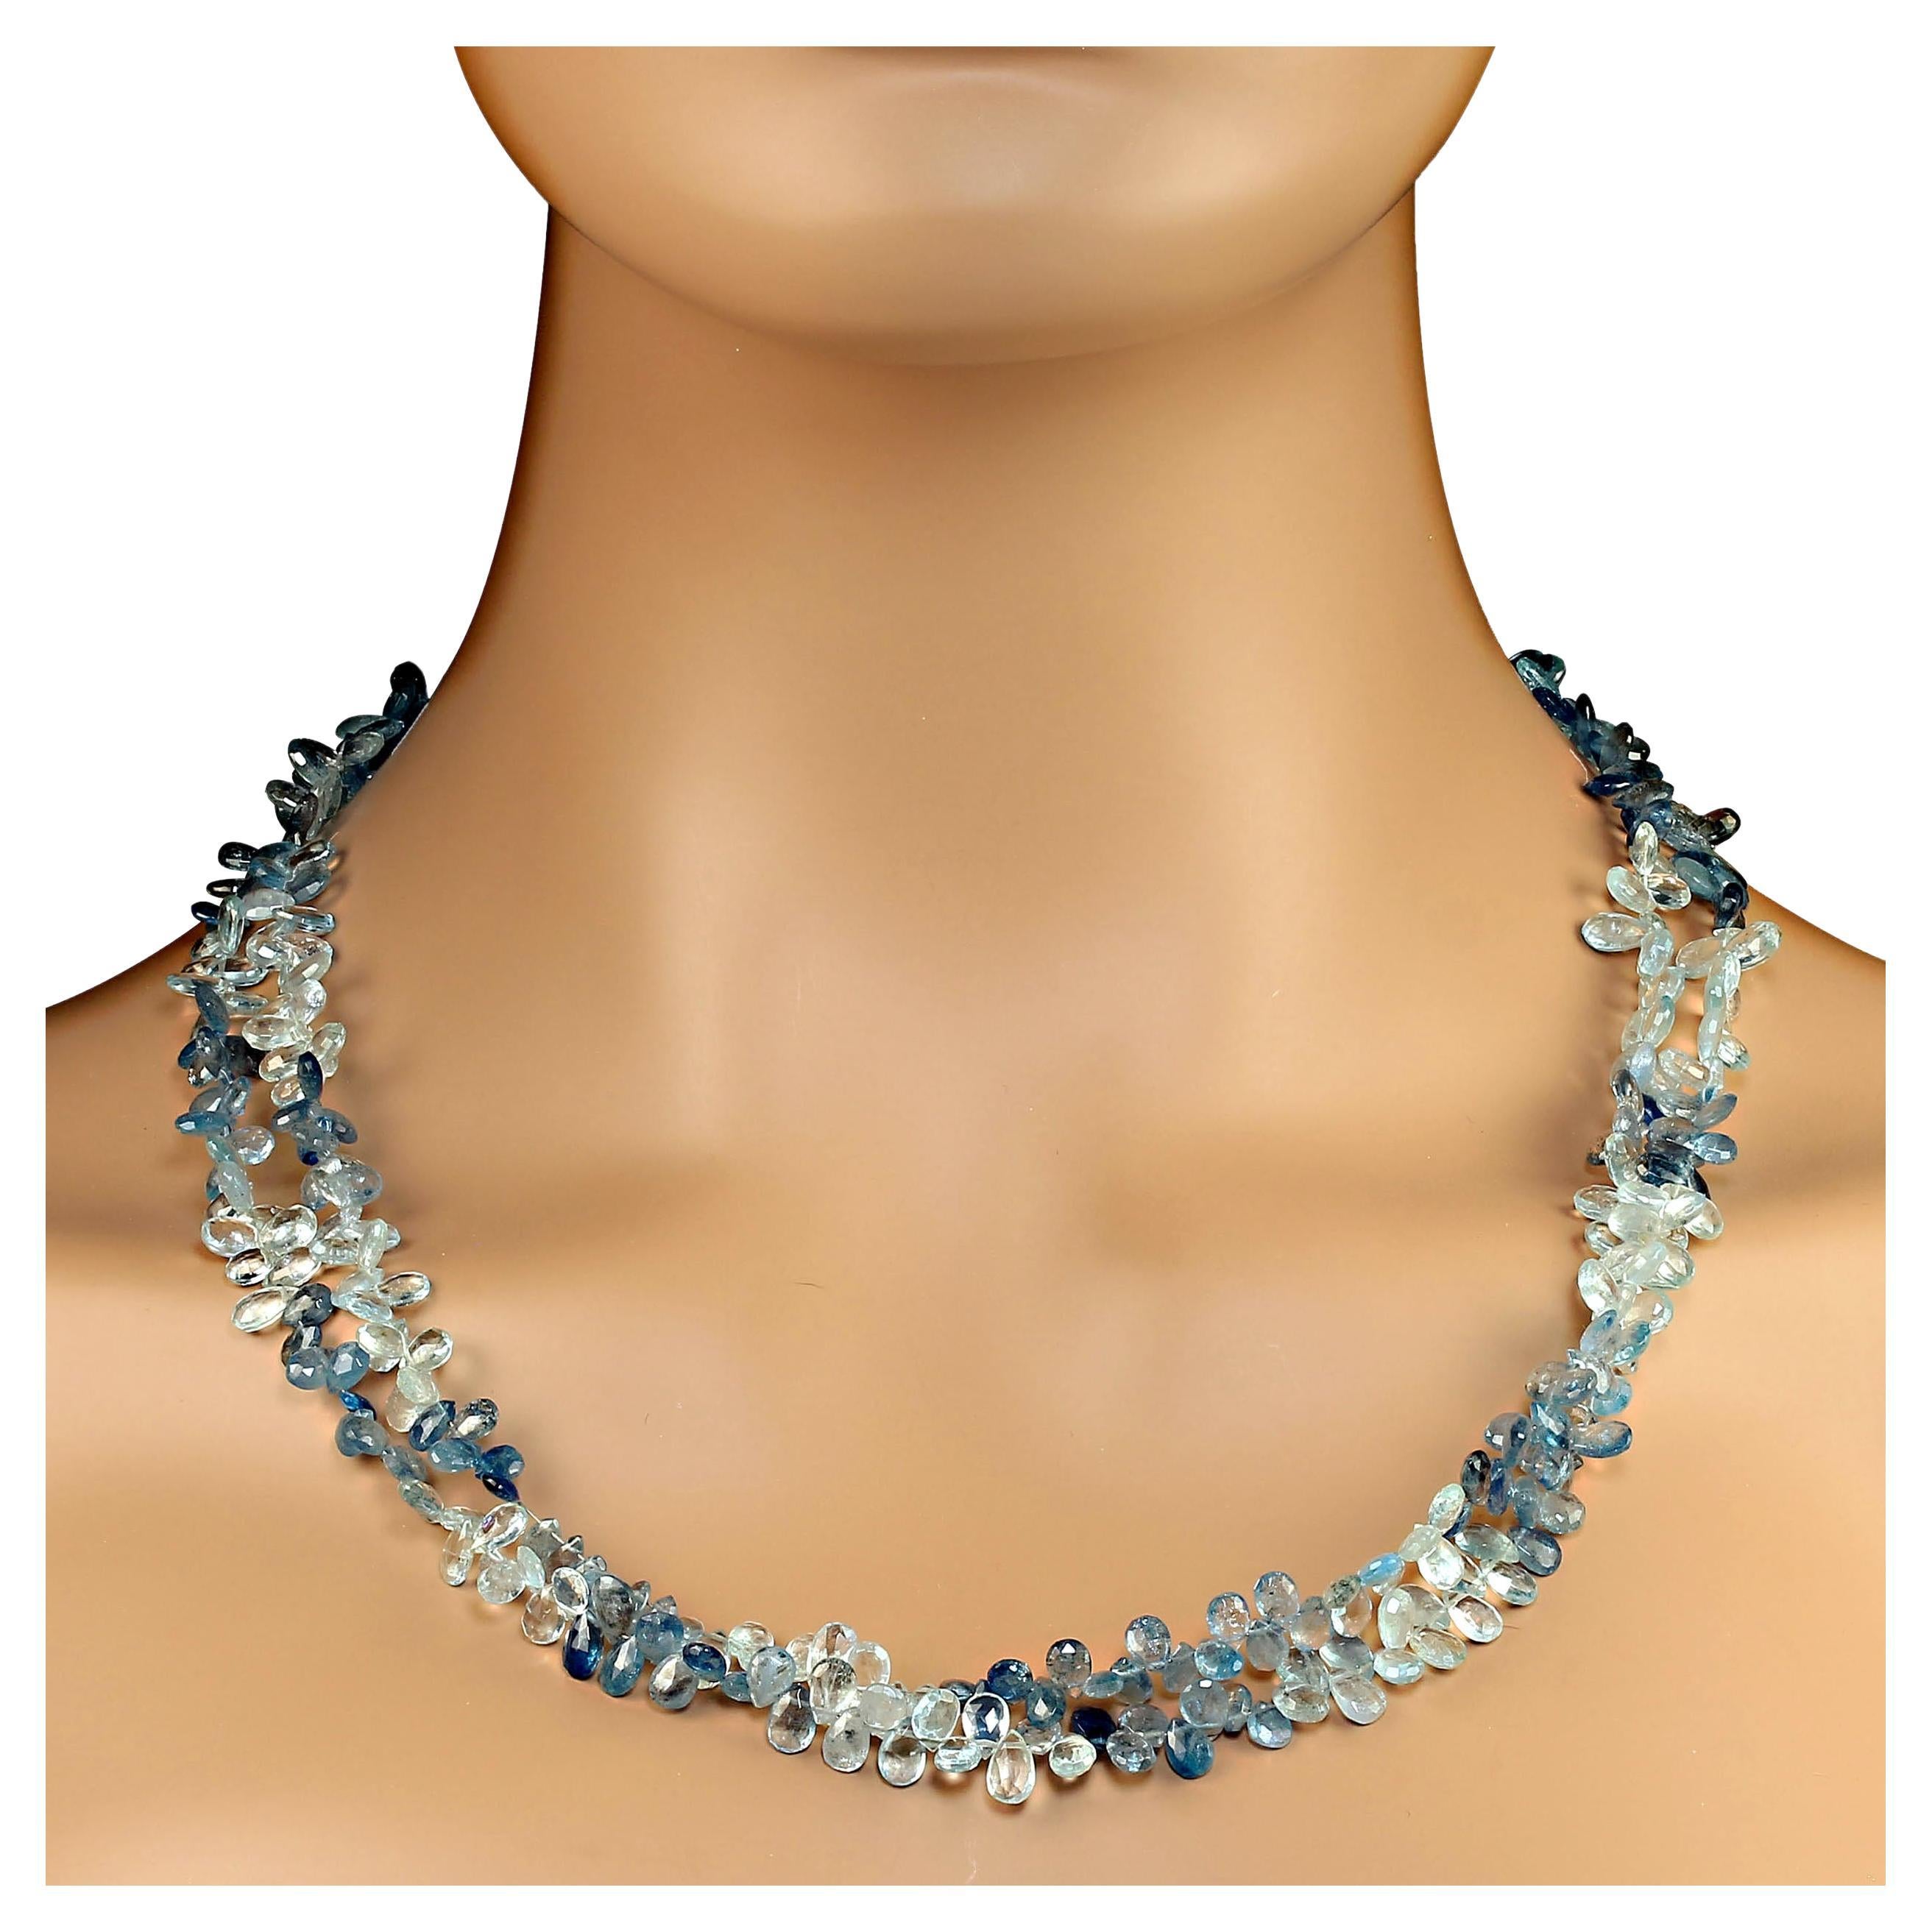 46 Inches of 7MM faceted sparkling briolettes of multi tone aquamarine.  The versatile necklace wraps and ties and twists as your heart desires. This magical long line of multi tone aquamarines  is secured with a double heart silver tone clasp that